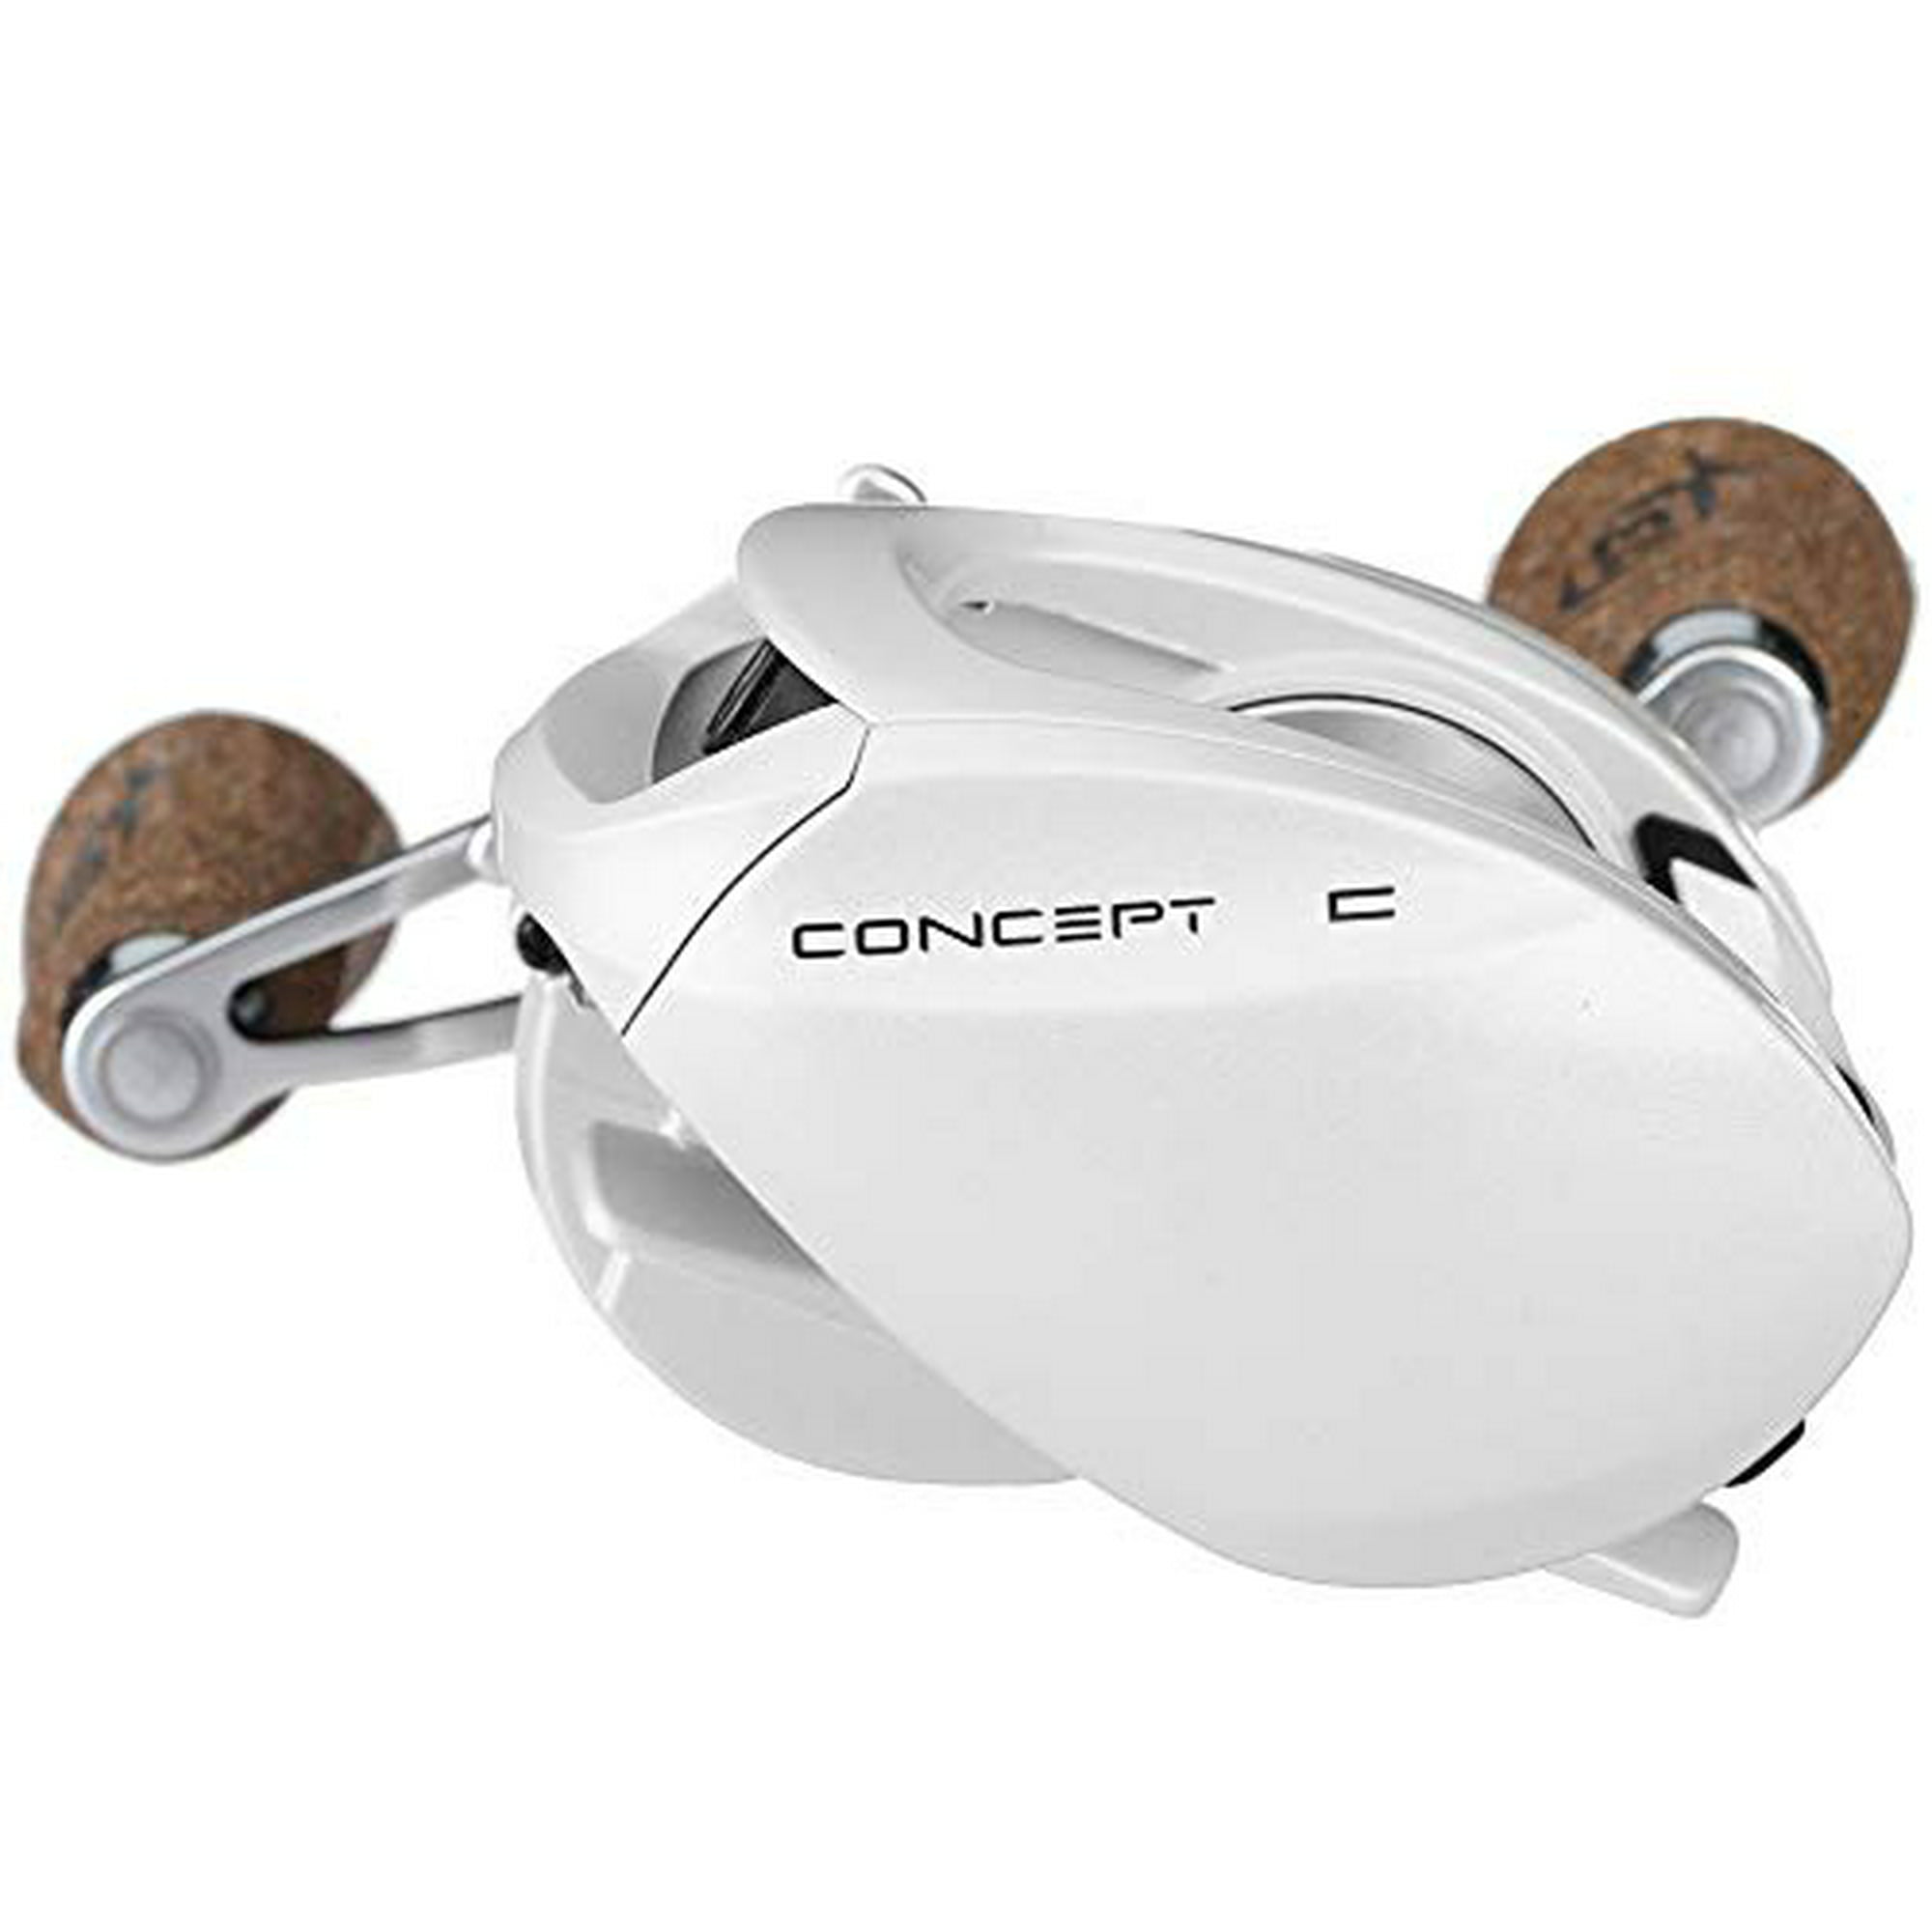 13 Fishing concept c 6.6:1 gear Ratio Right Hand Saltwater Reel 